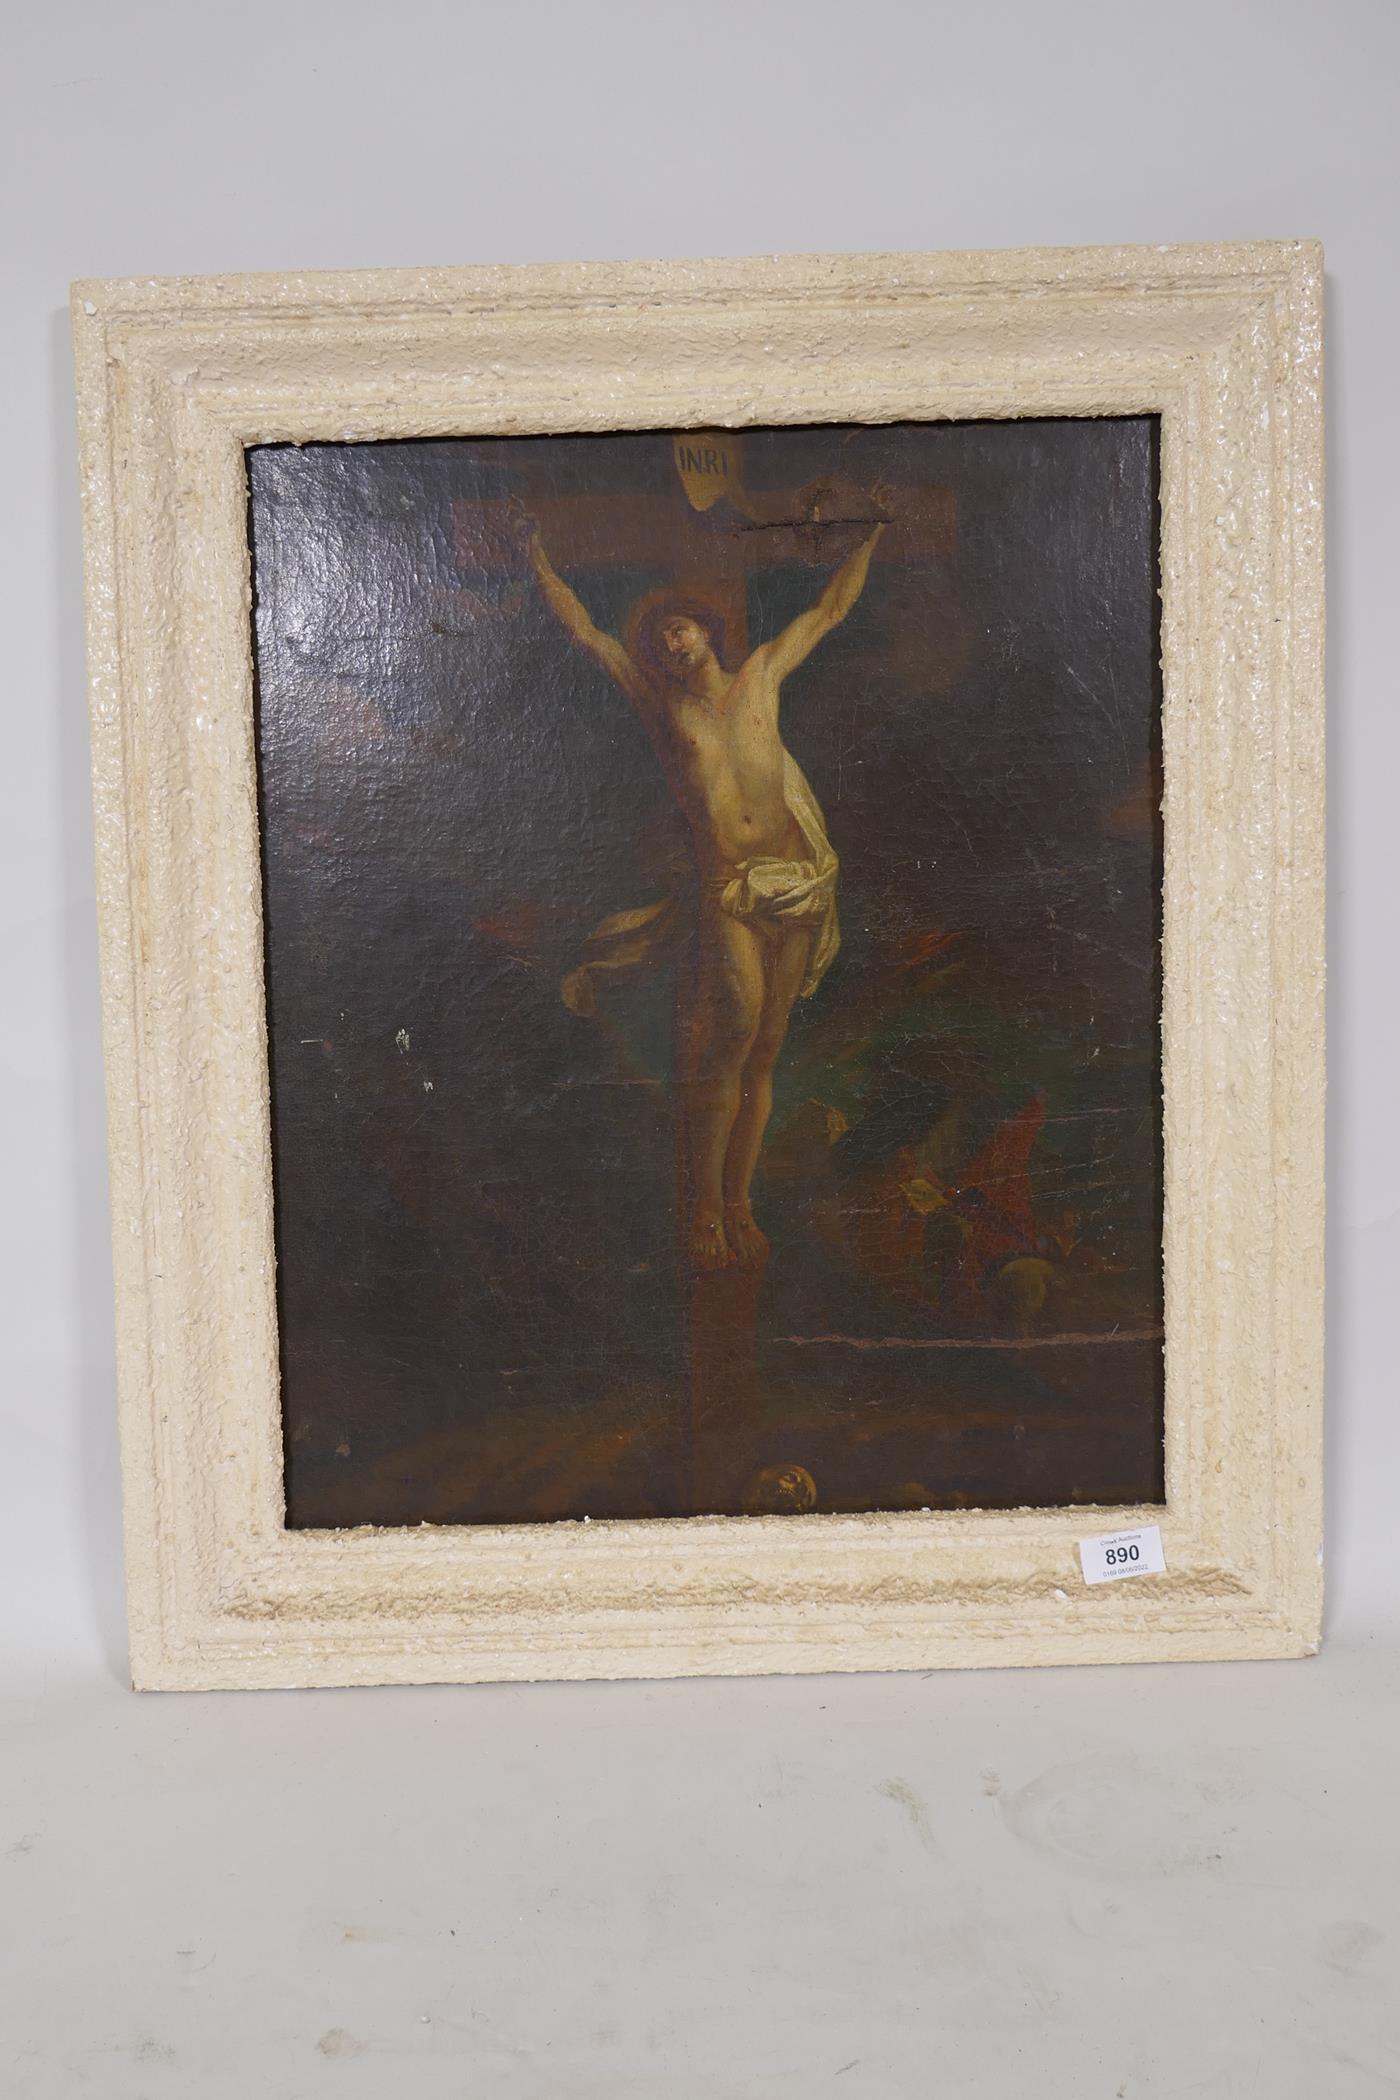 The Crucifixtion, C18th/C19th, probably continental, oil on canvas laid on board, unsigned, 40 x - Image 4 of 5